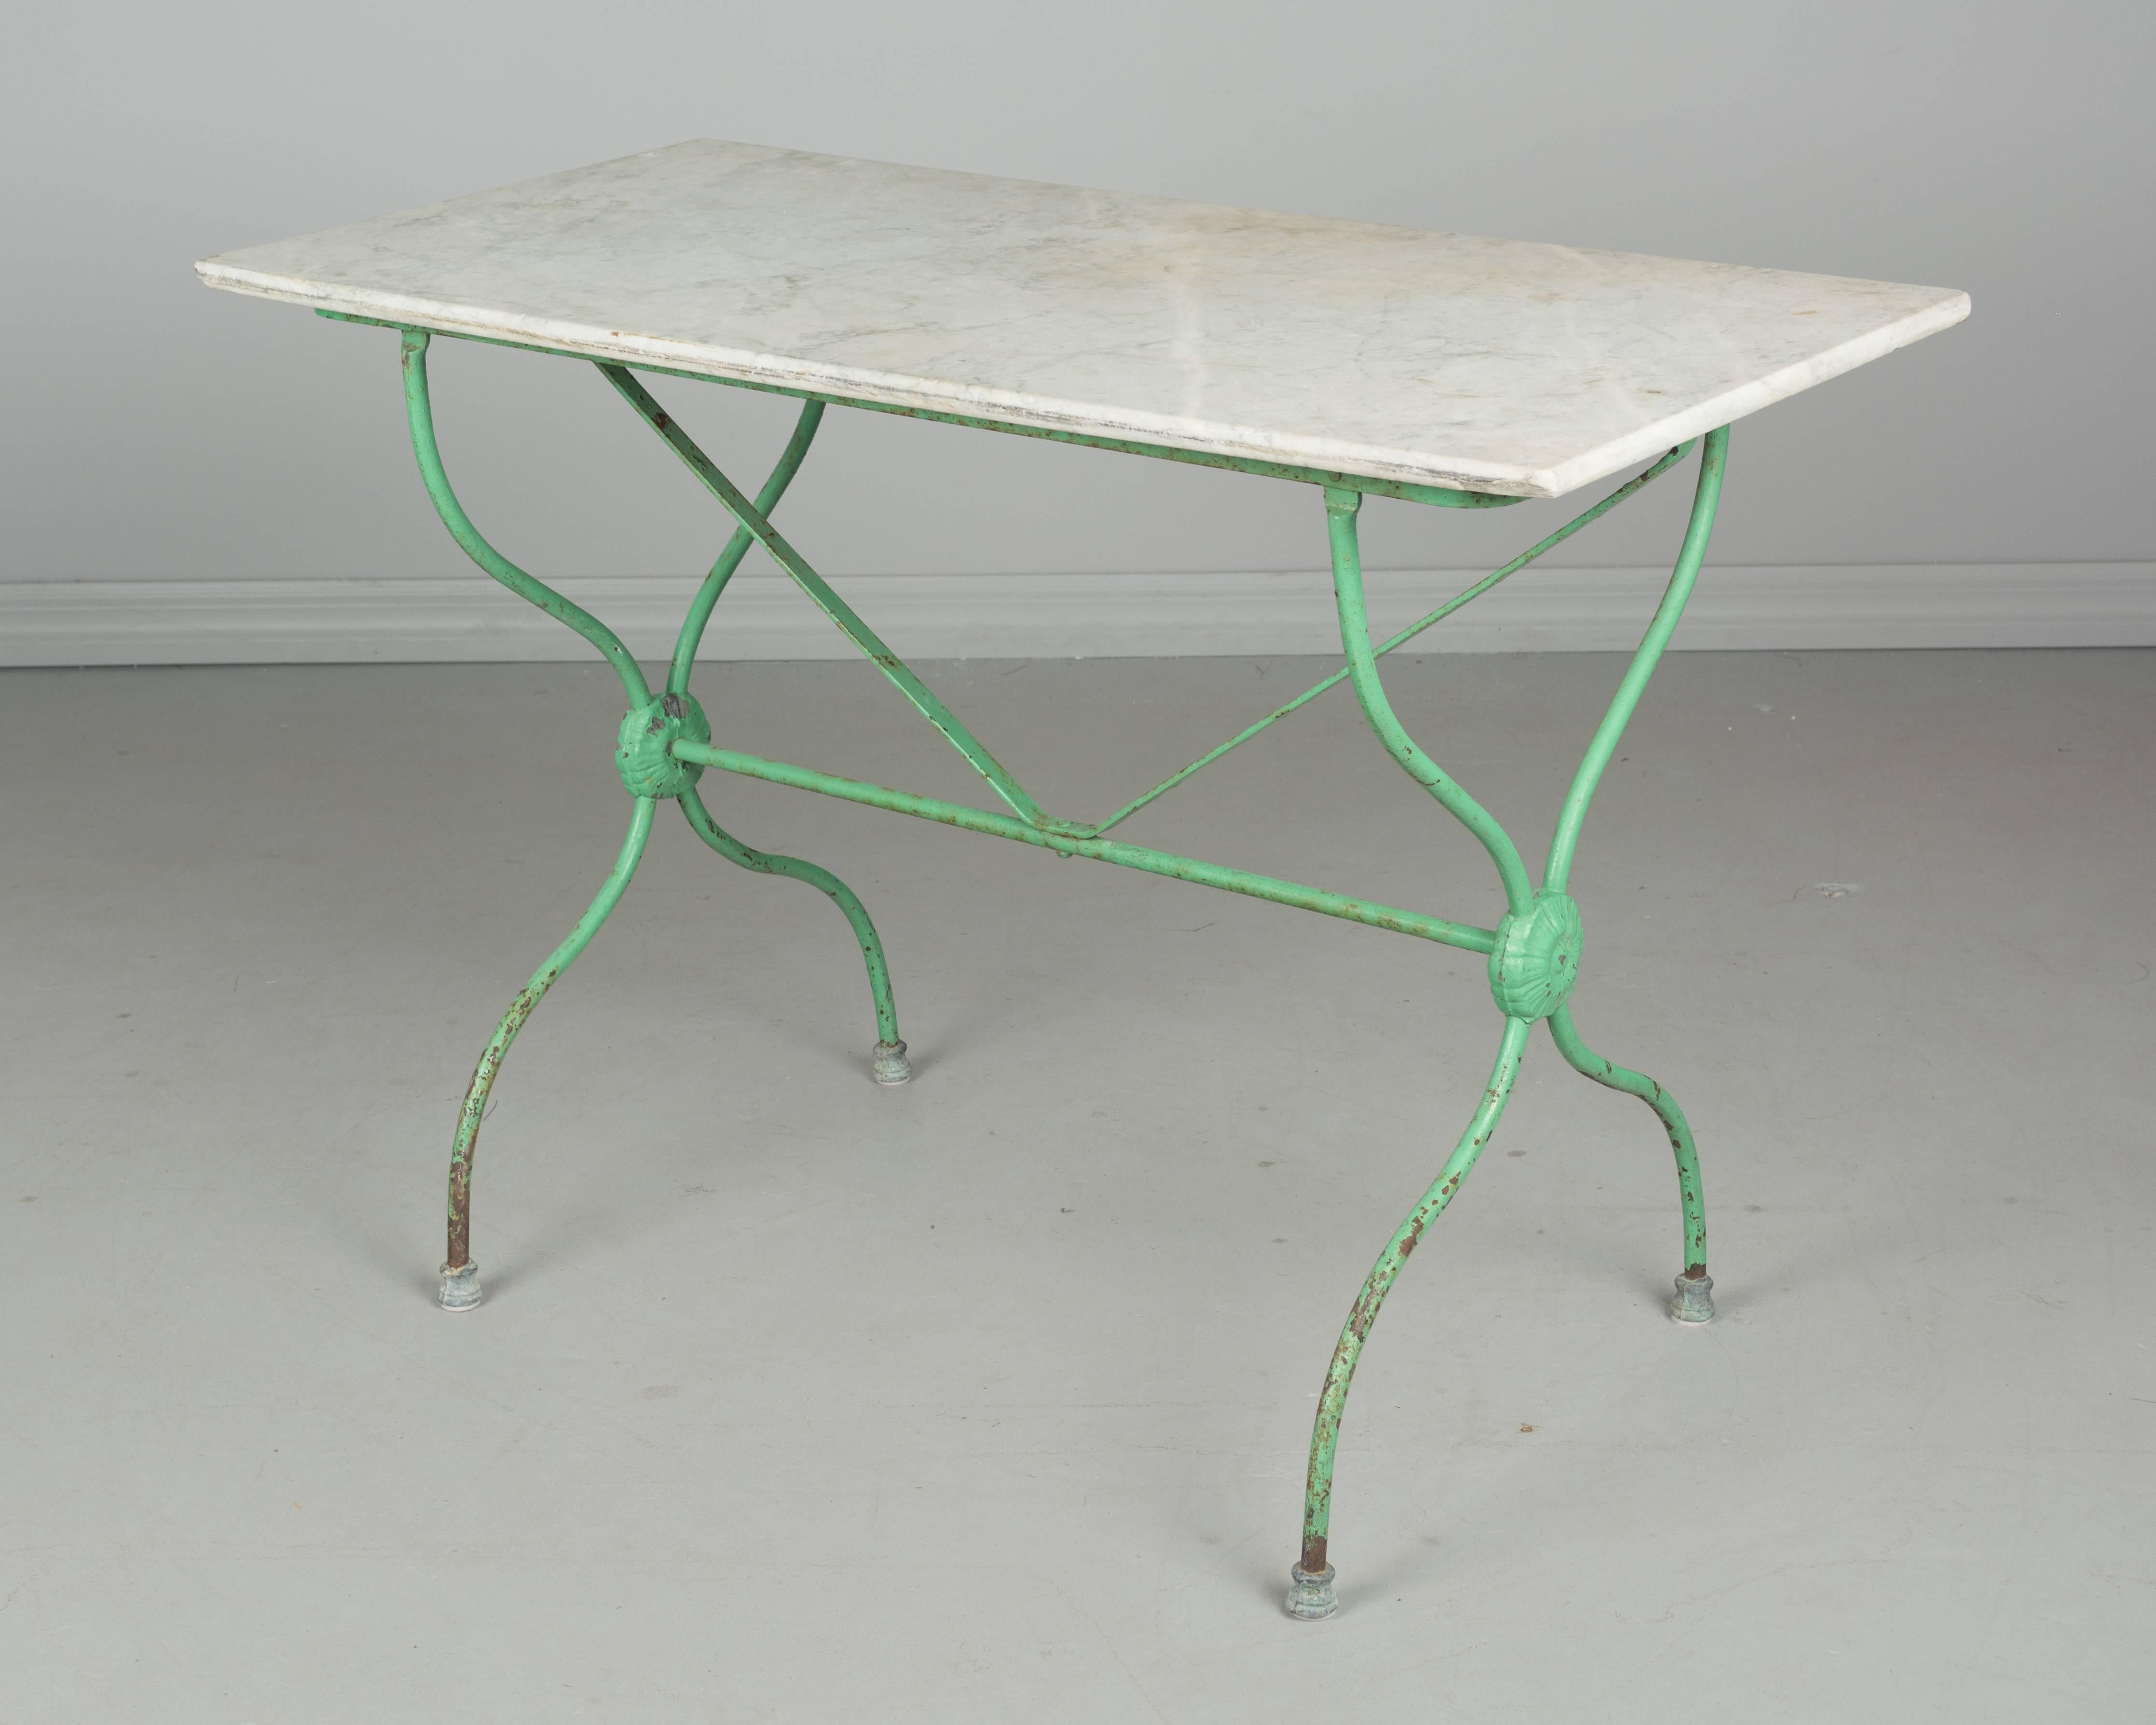 A 19th century French cast iron bistro table with green painted patina and marble top. All original. More photos available upon request. We have a large selection of French antiques at Olivier Fleury, Inc. Please visit our showroom in Winter Park,